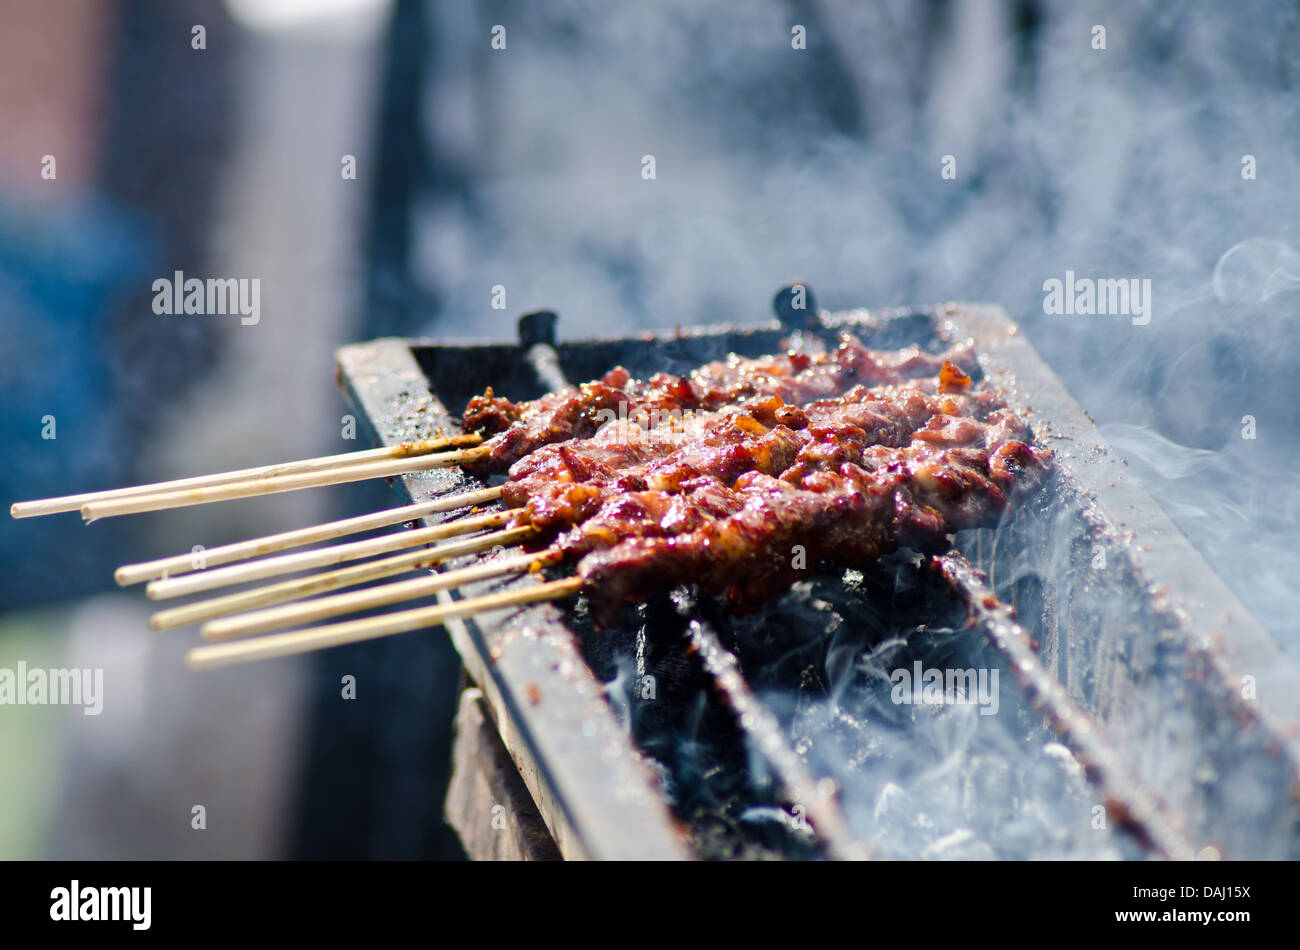 Barbeque Chicken Kebab Stock Photo